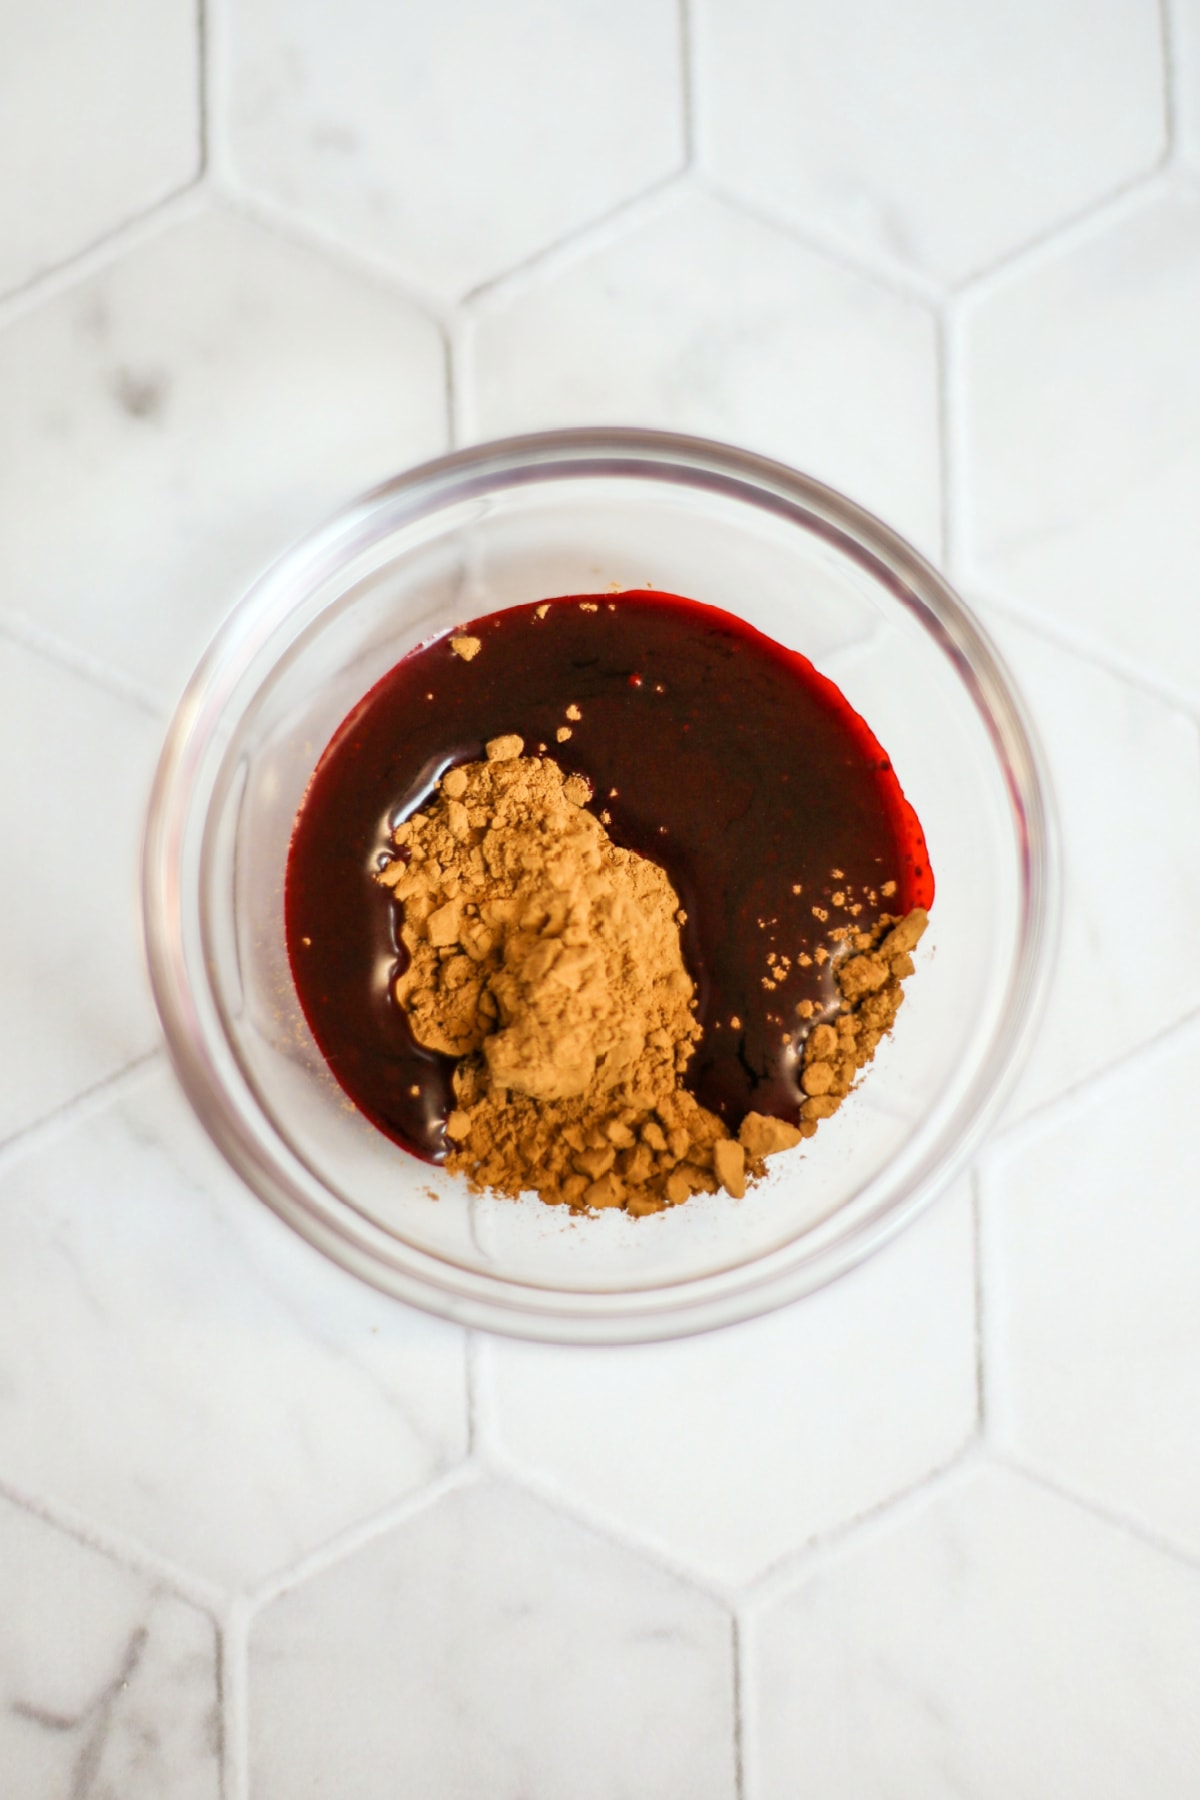 Red food coloring mixed with cocoa powder